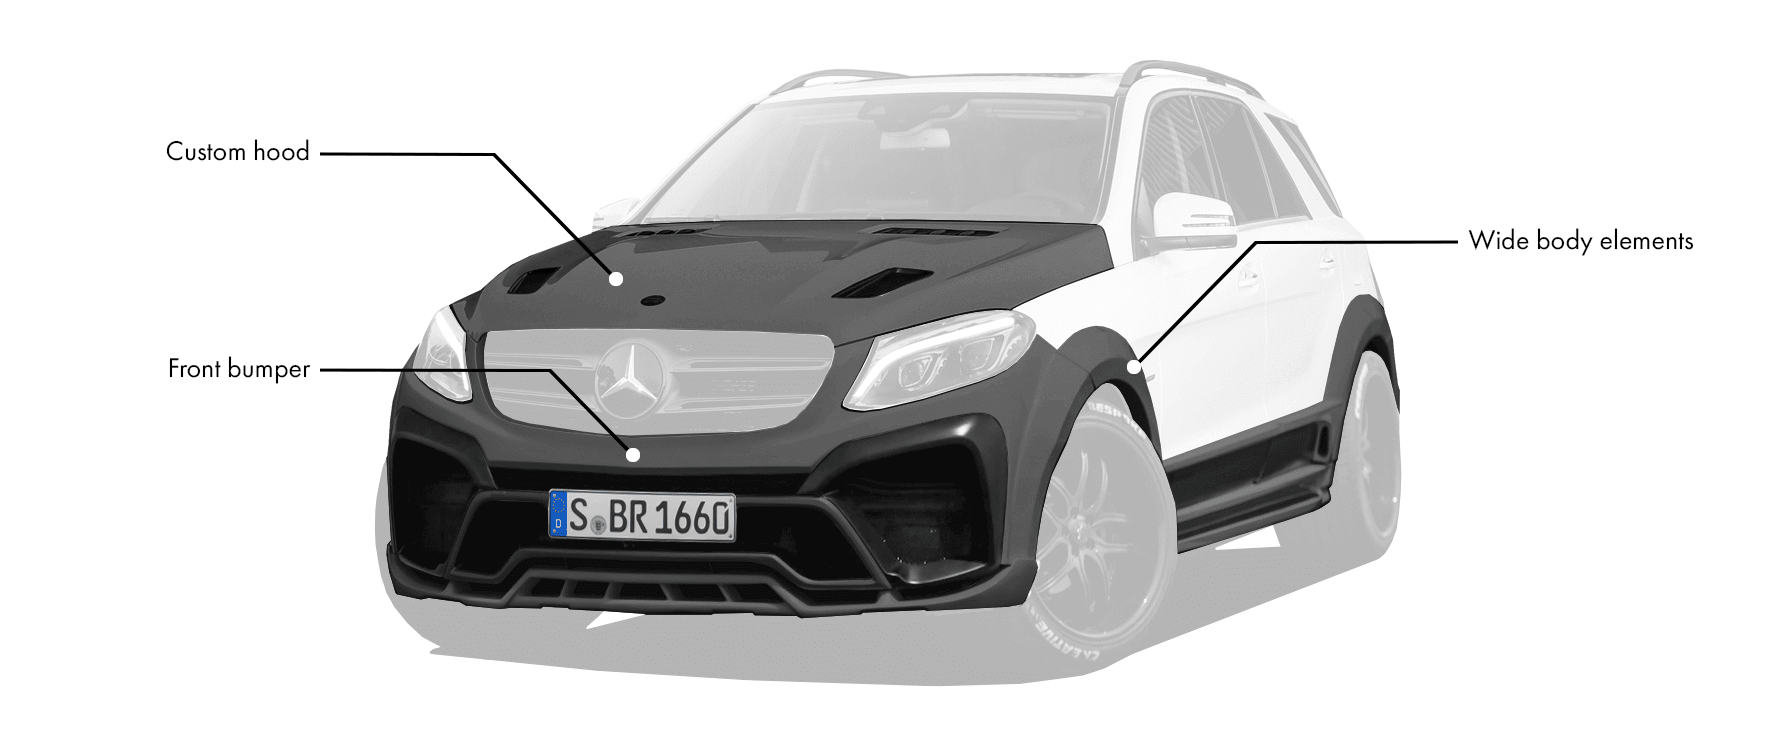 Check our price and buy a Renegade Design body kit for Mercedes-Benz GLE W166!